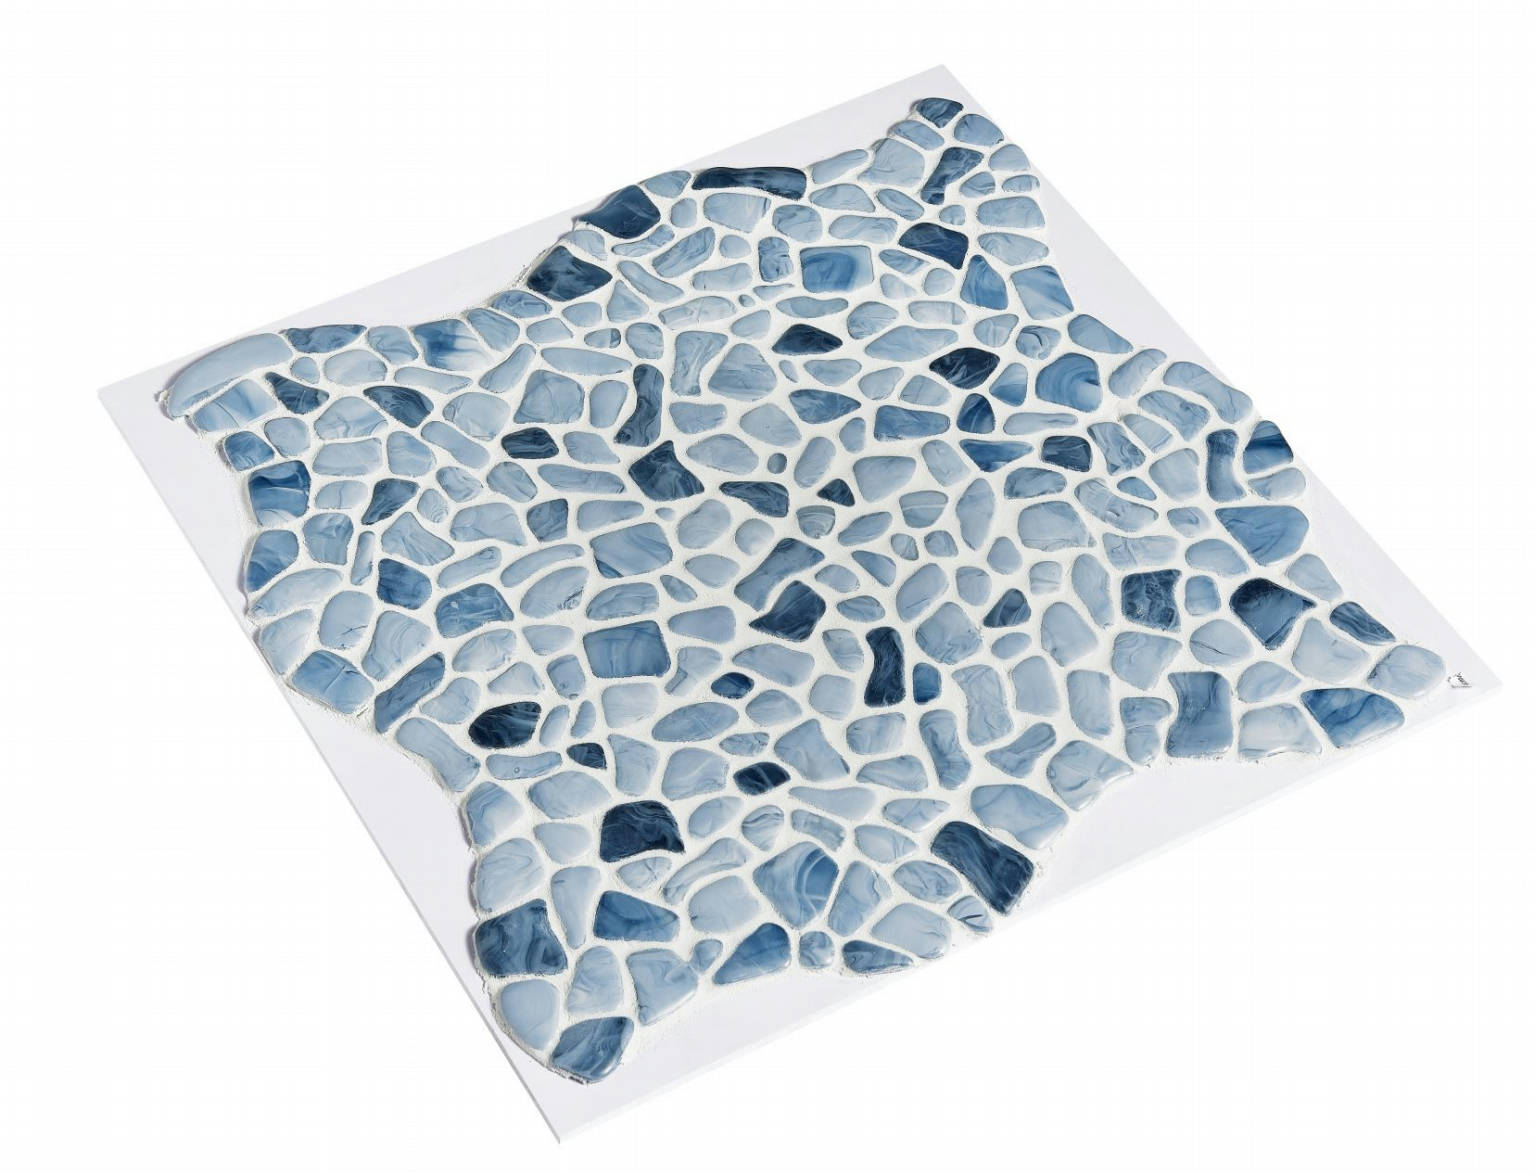 Denali | Stones And More | Finest selection of Mosaics, Glass, Tile and Stone